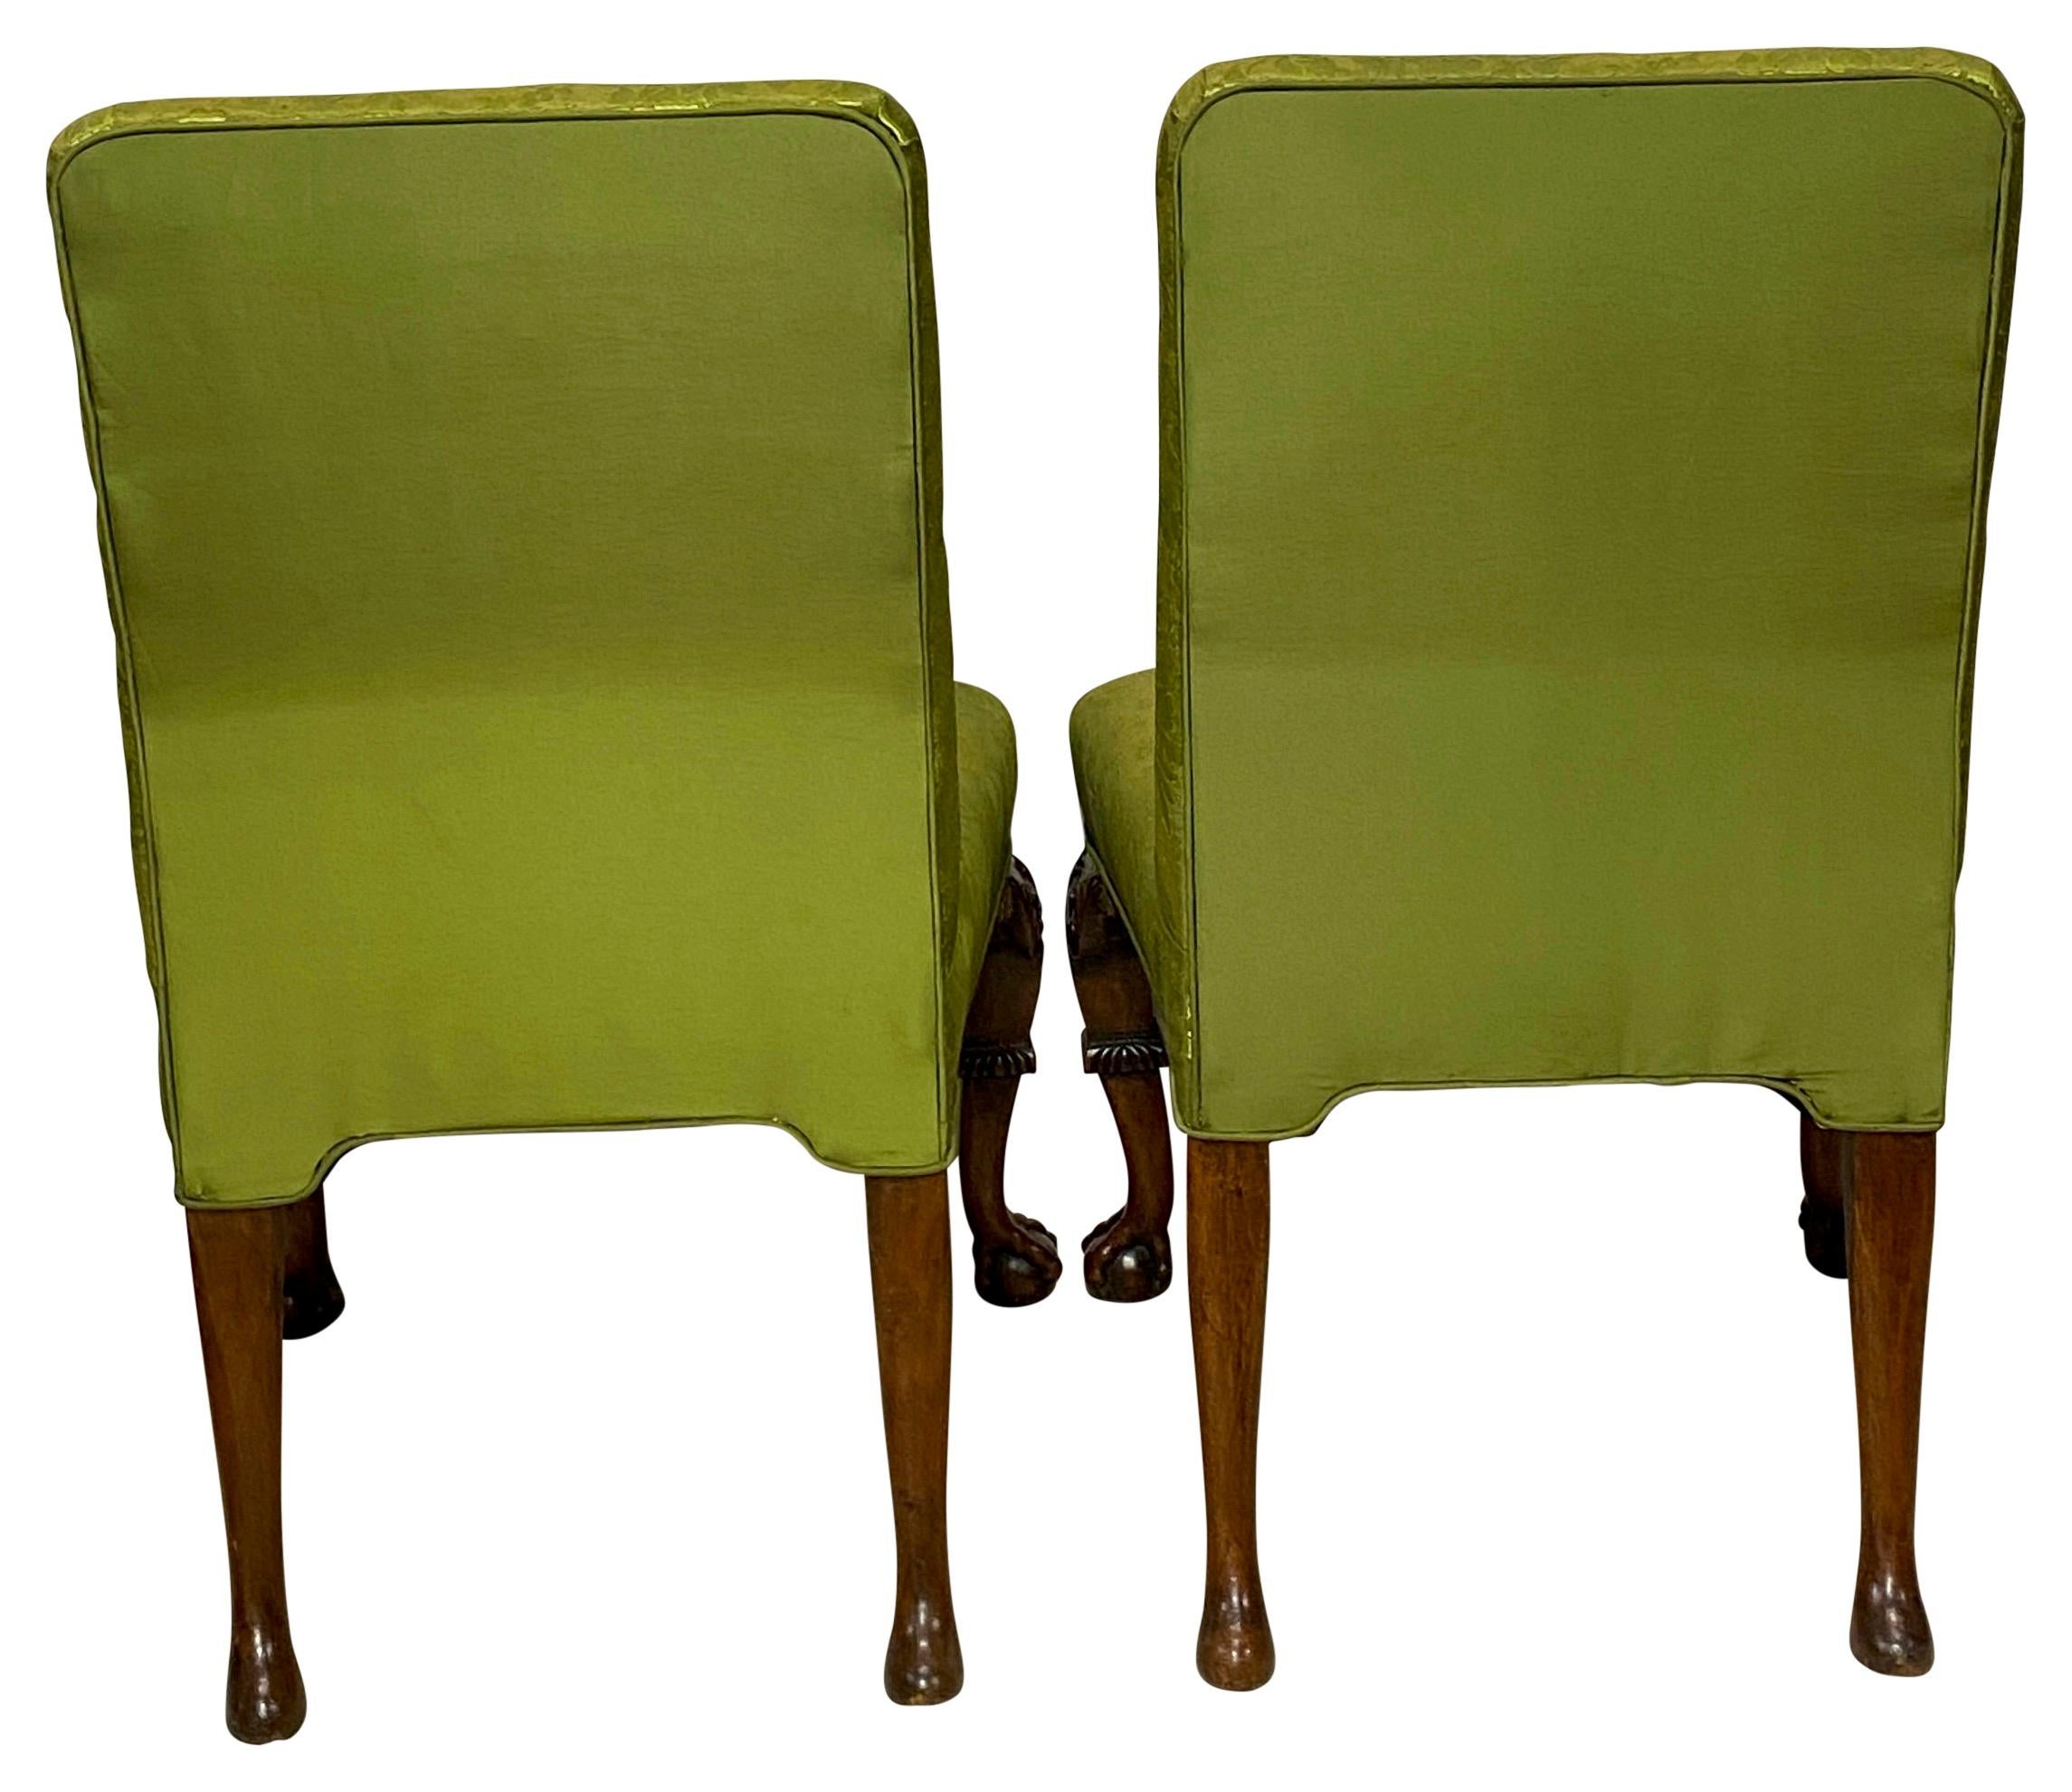 Upholstery Pair of Exceptional 18th Century English Chippendale Mahogany Side Chairs For Sale